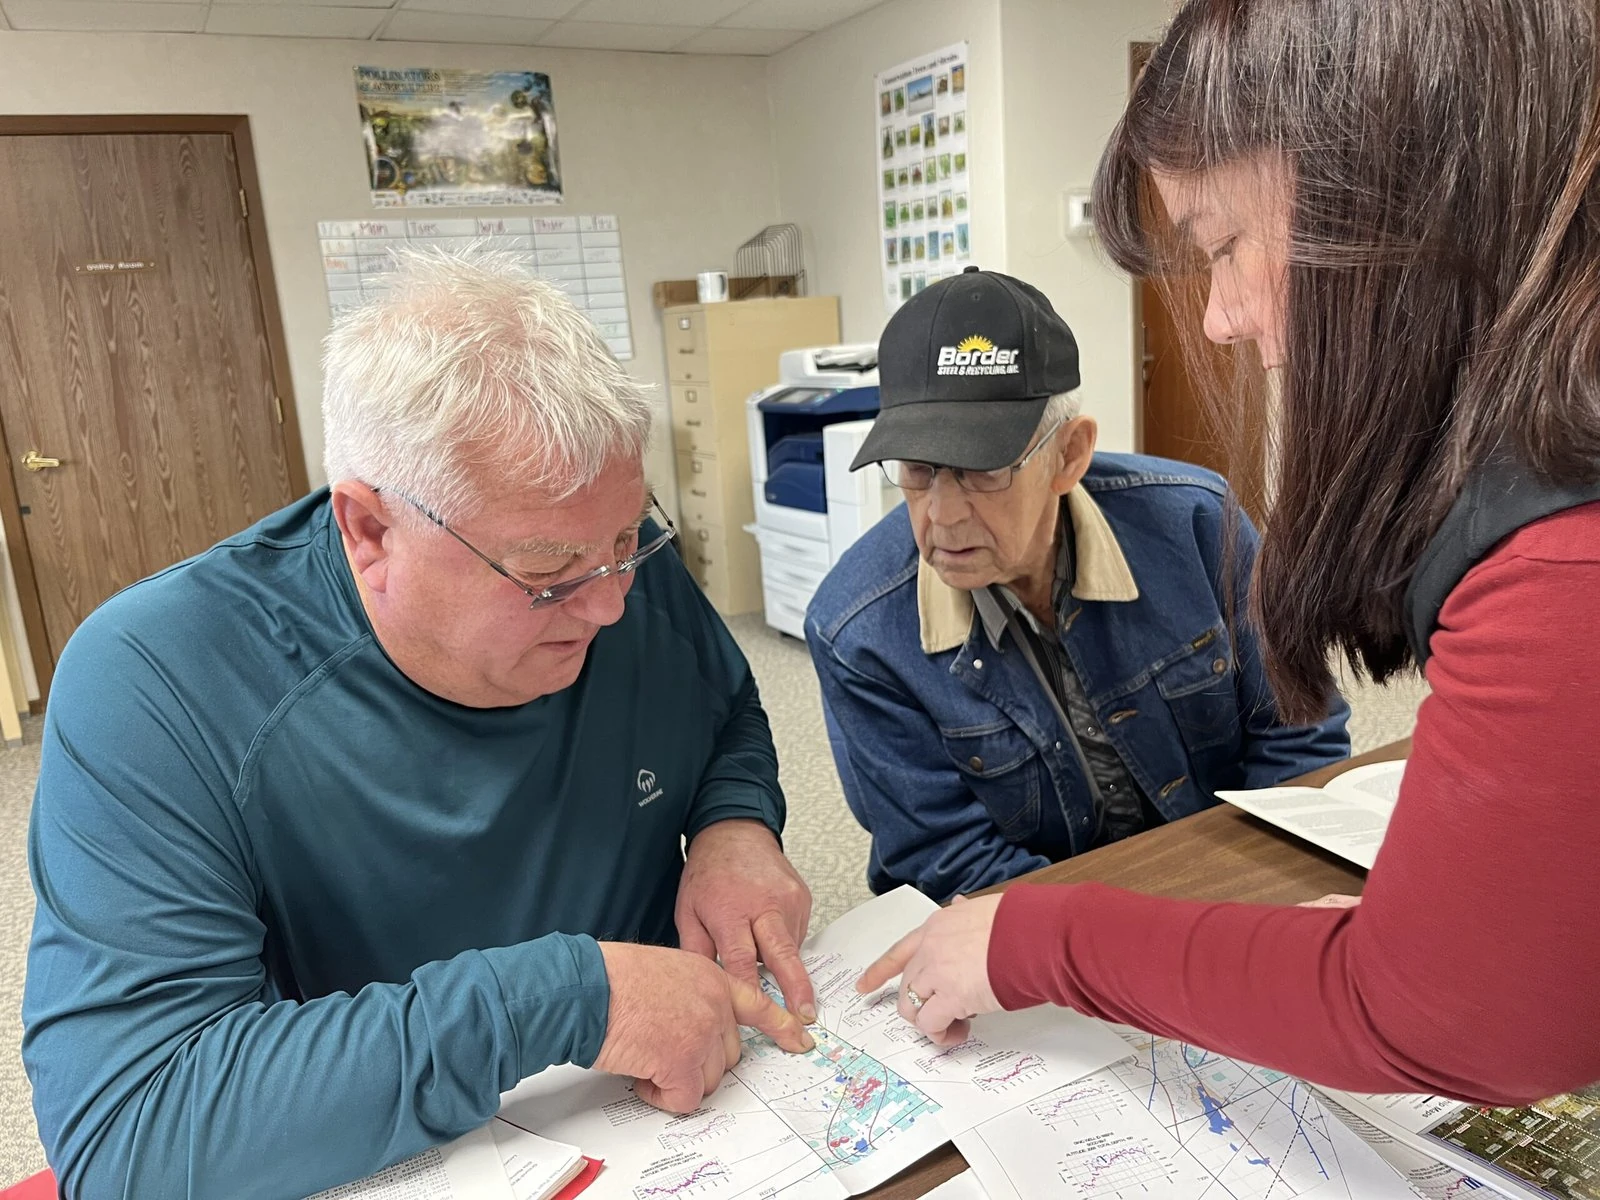 From left to right, Jeff Wivholm, Marlowe Onstead and Amy Yoder look through maps of irrigation pivots and aquifer allocations inside the Sheridan County Conservation District office in Plentywood, Montana.